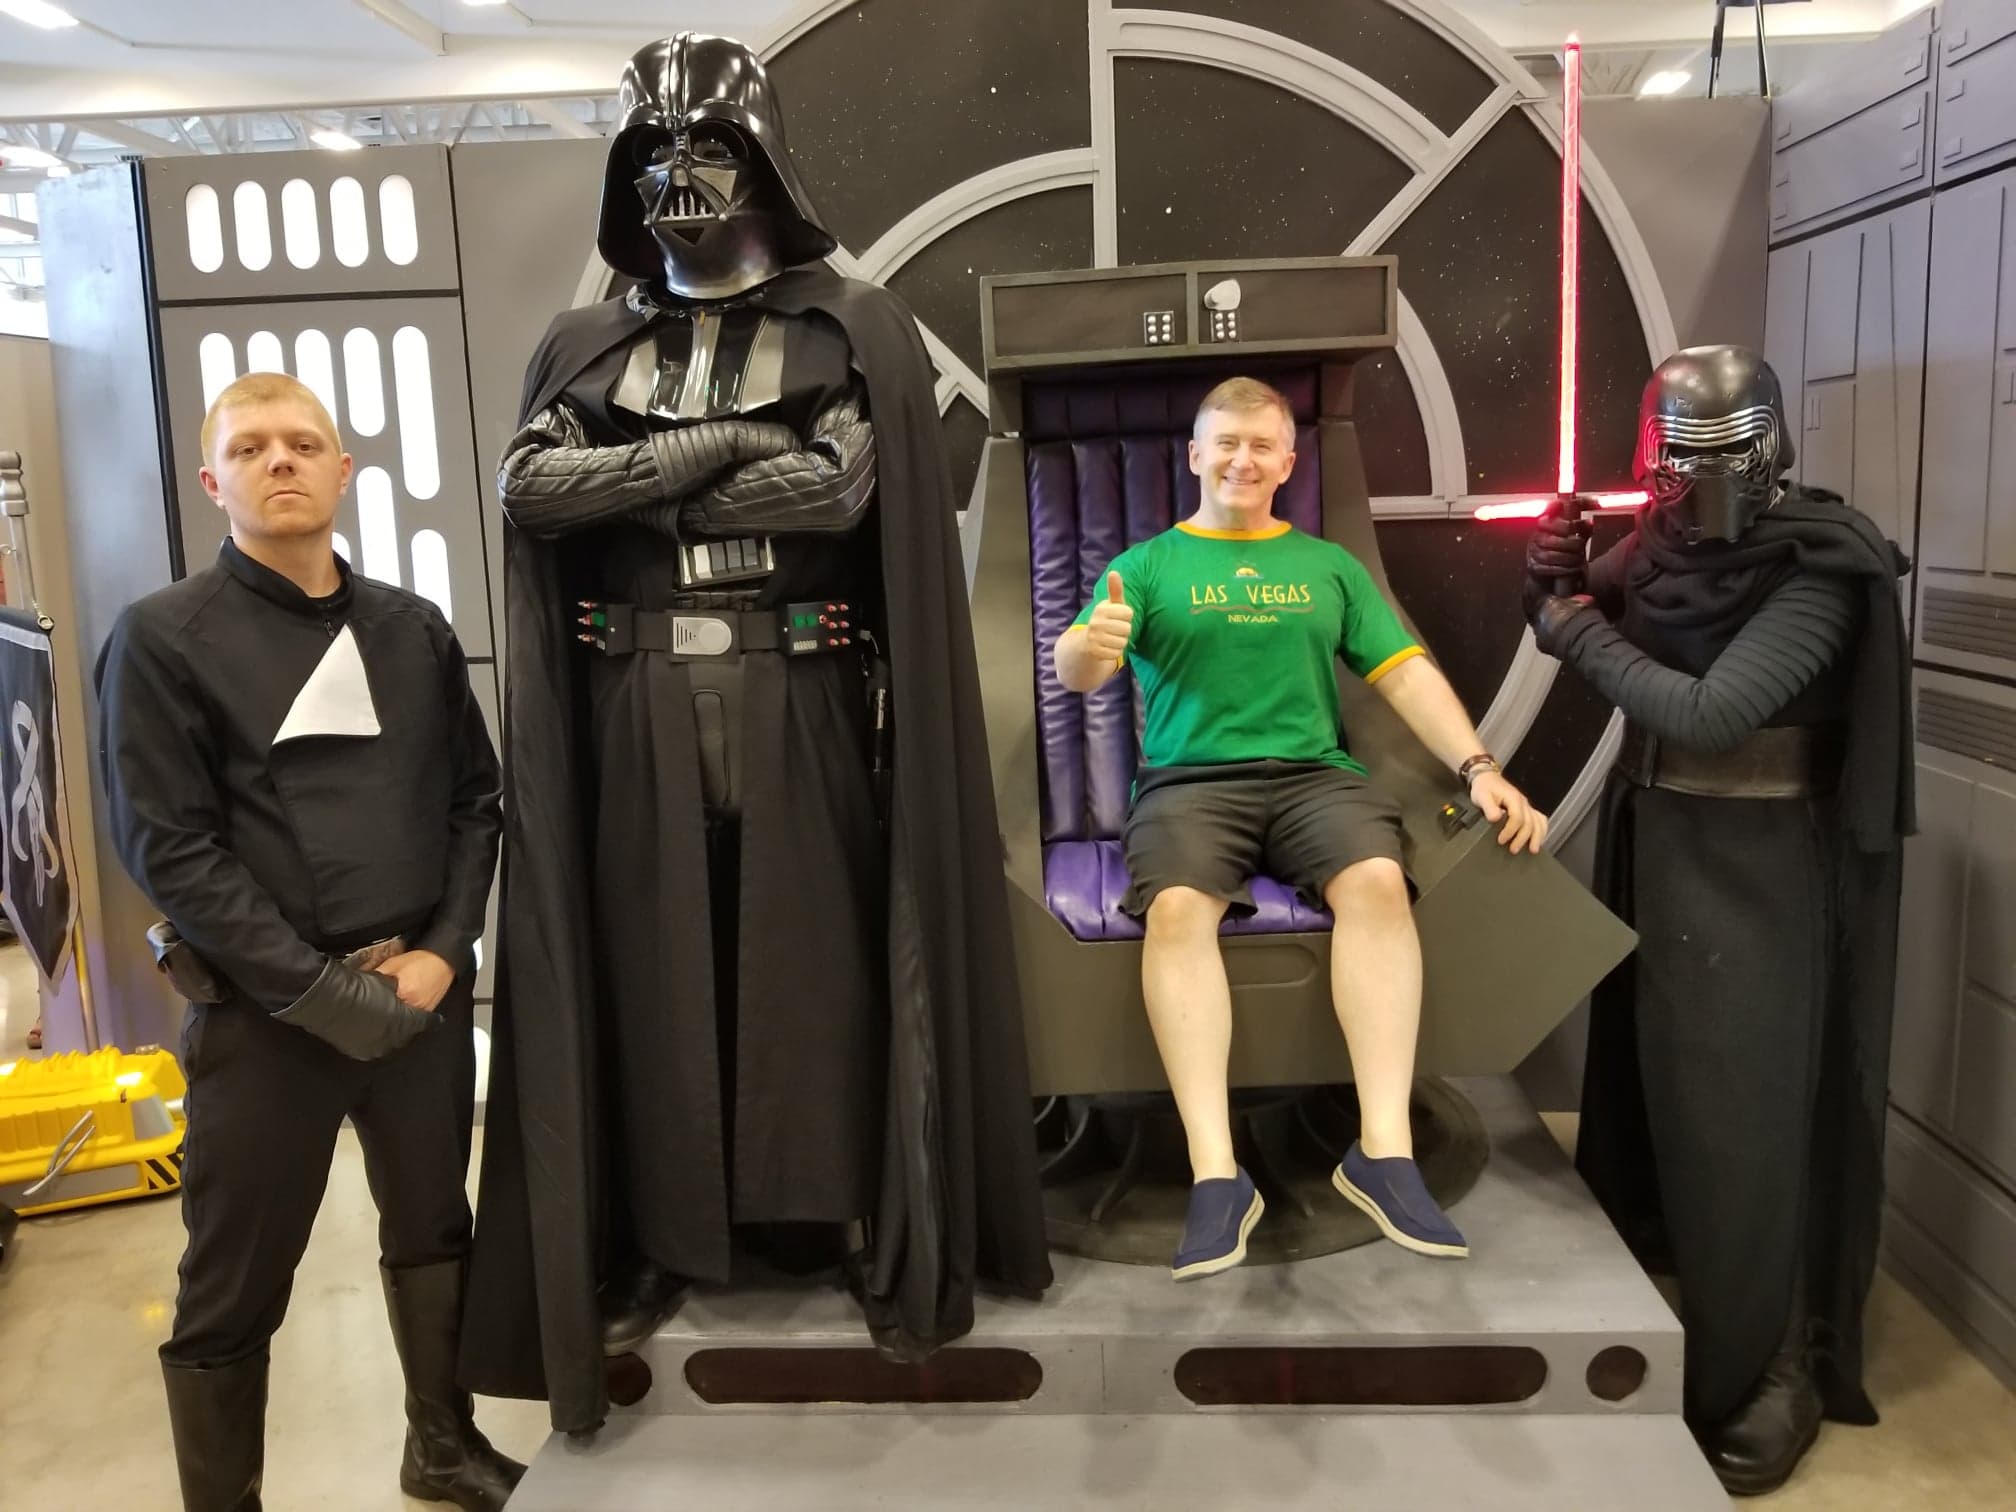 Kylo Ren, Vader, First Order's Hux (cosplayers)